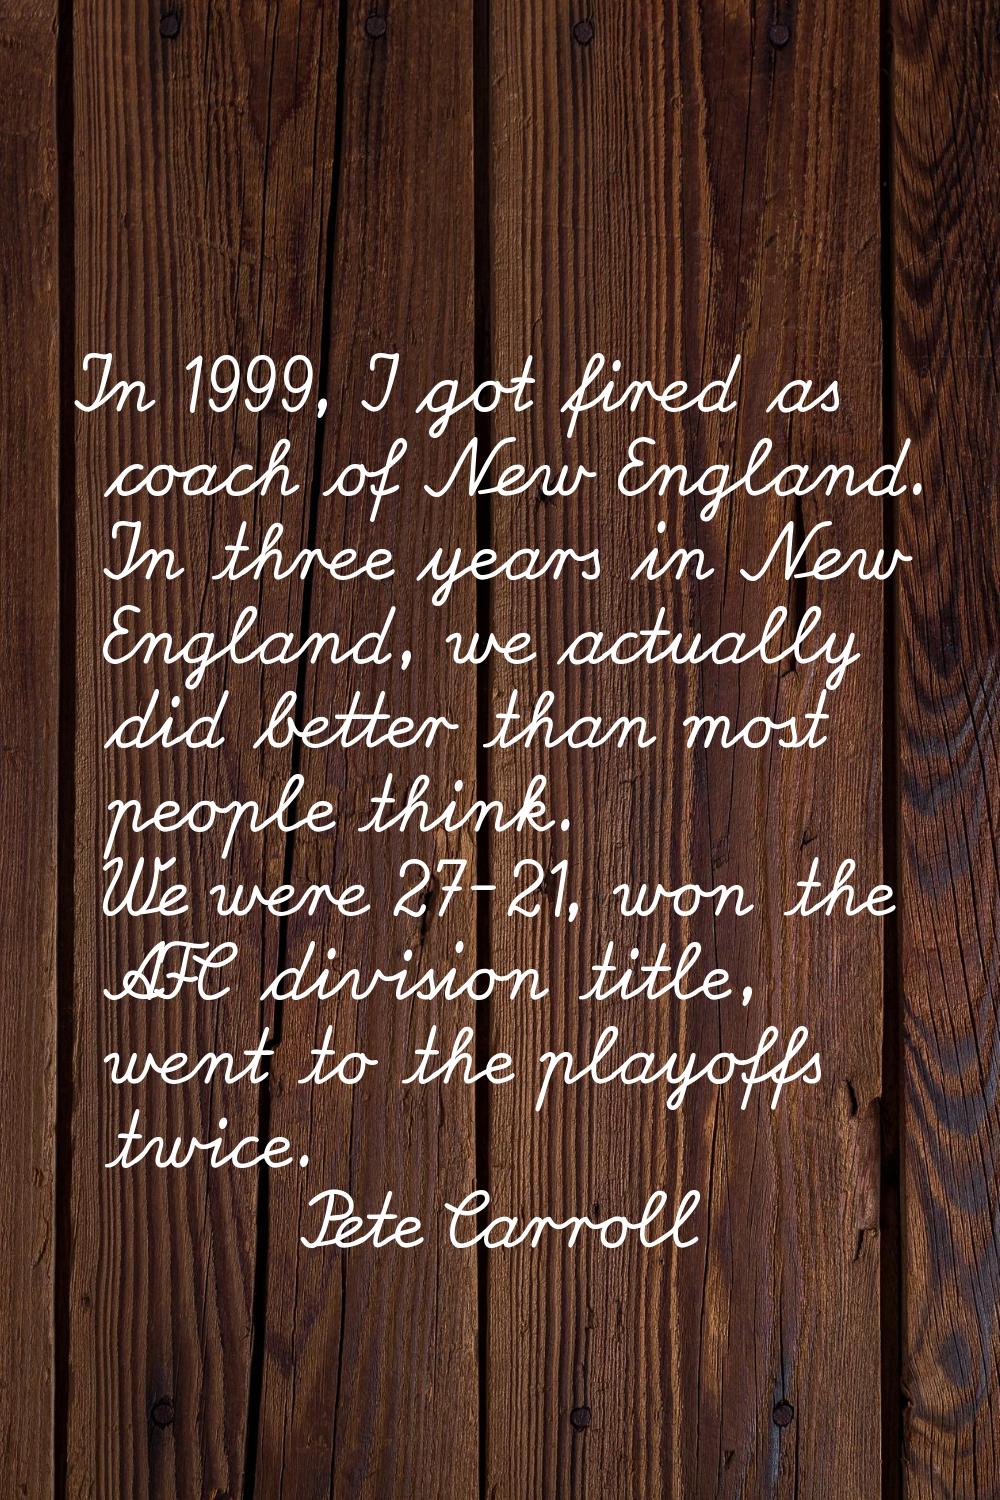 In 1999, I got fired as coach of New England. In three years in New England, we actually did better